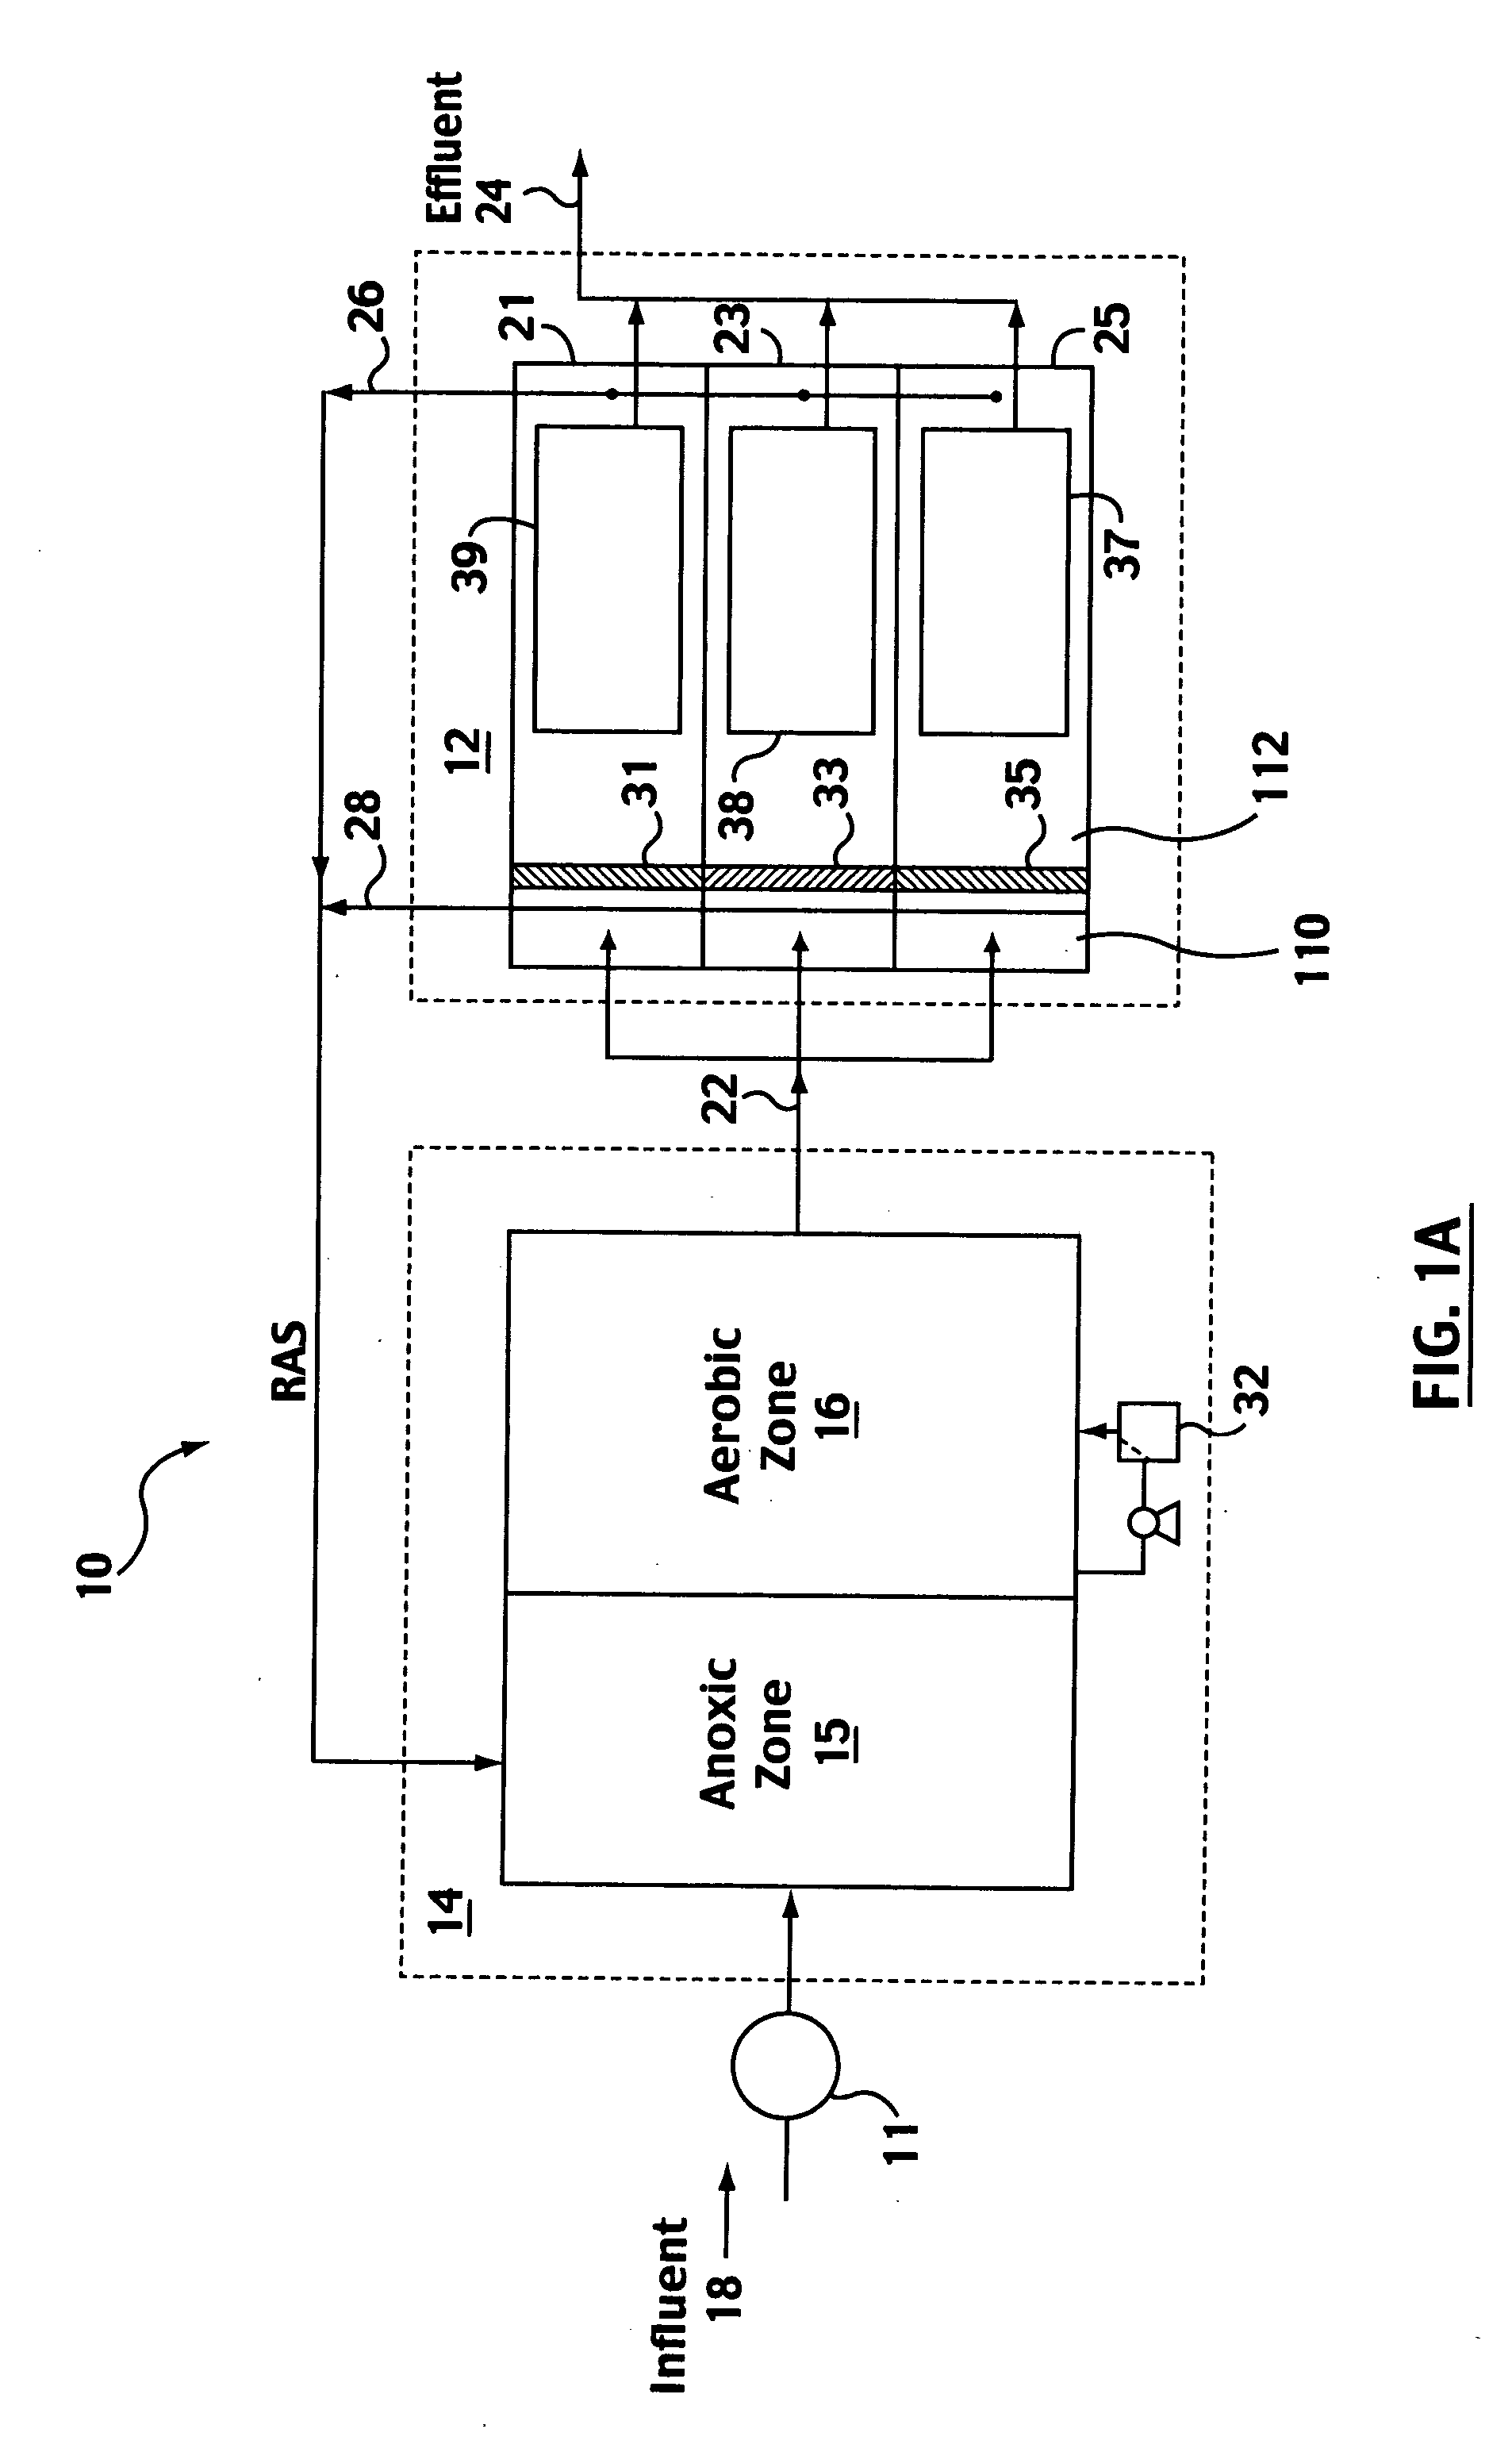 Screening apparatus for water treatment with membranes